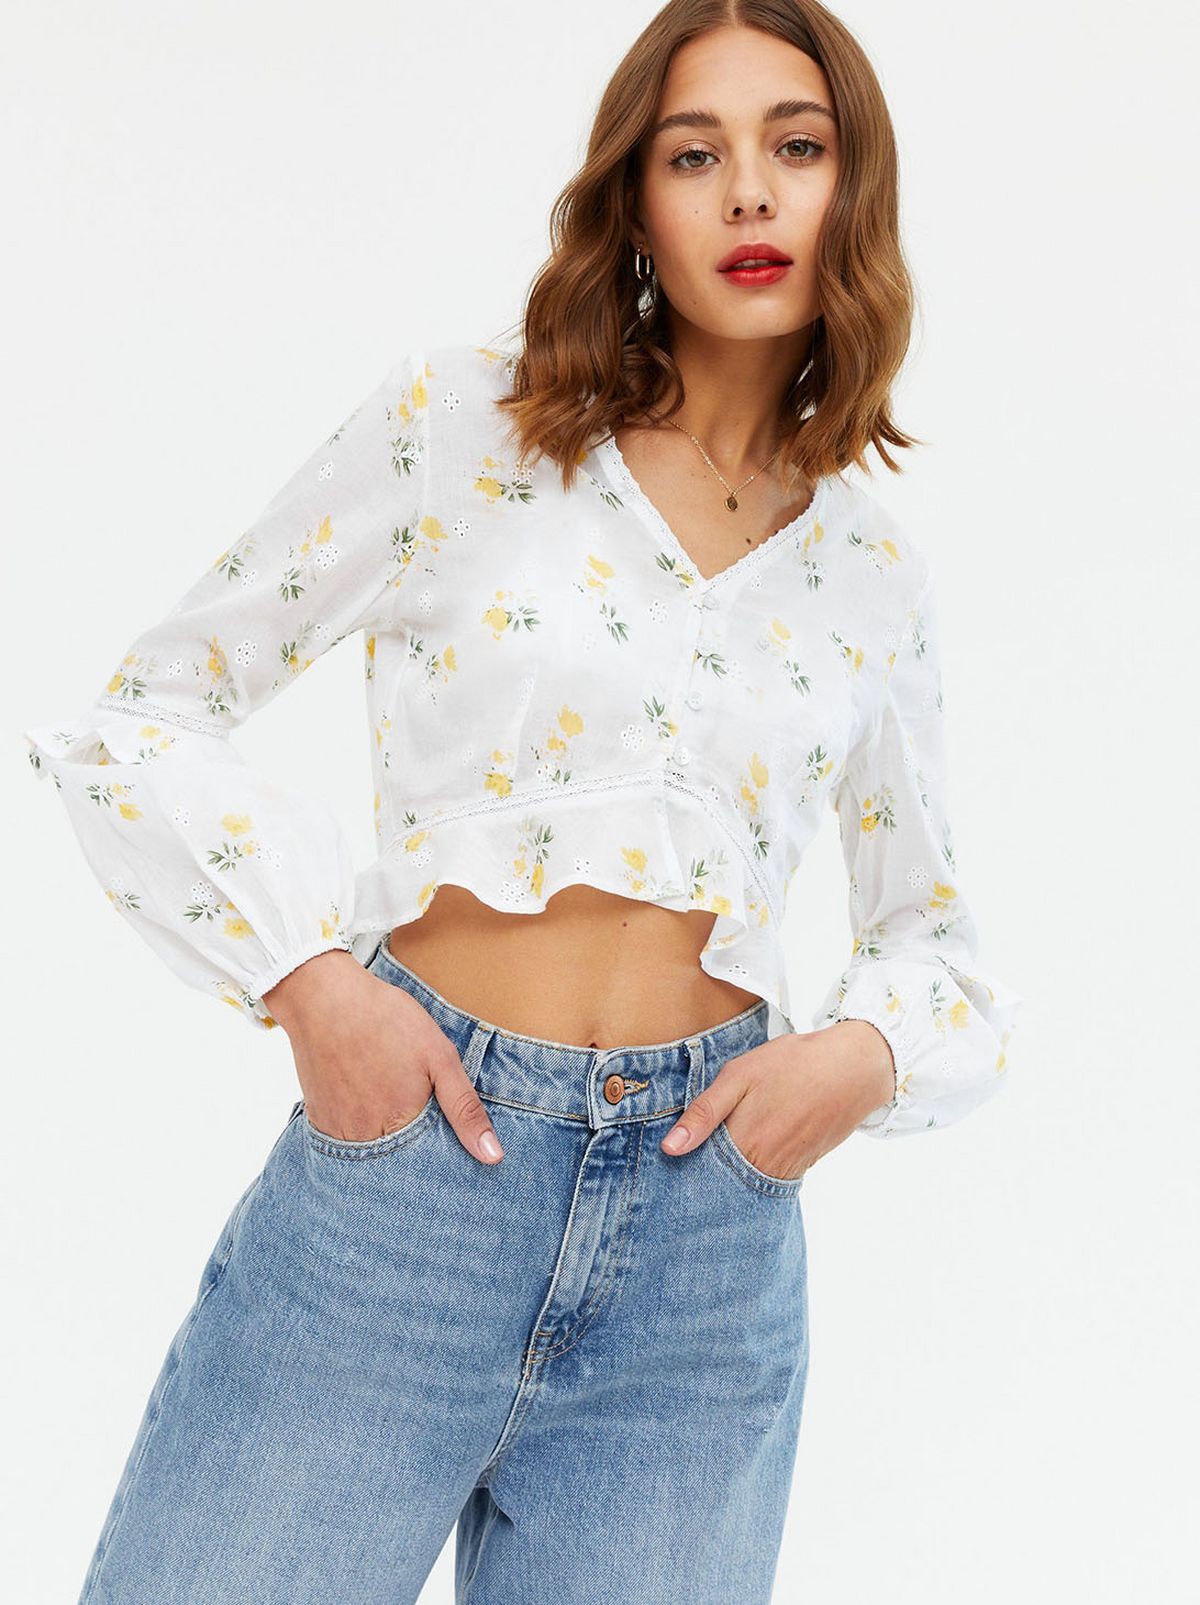 9 Summer Tops That Are Guaranteed to Make You Feel Good